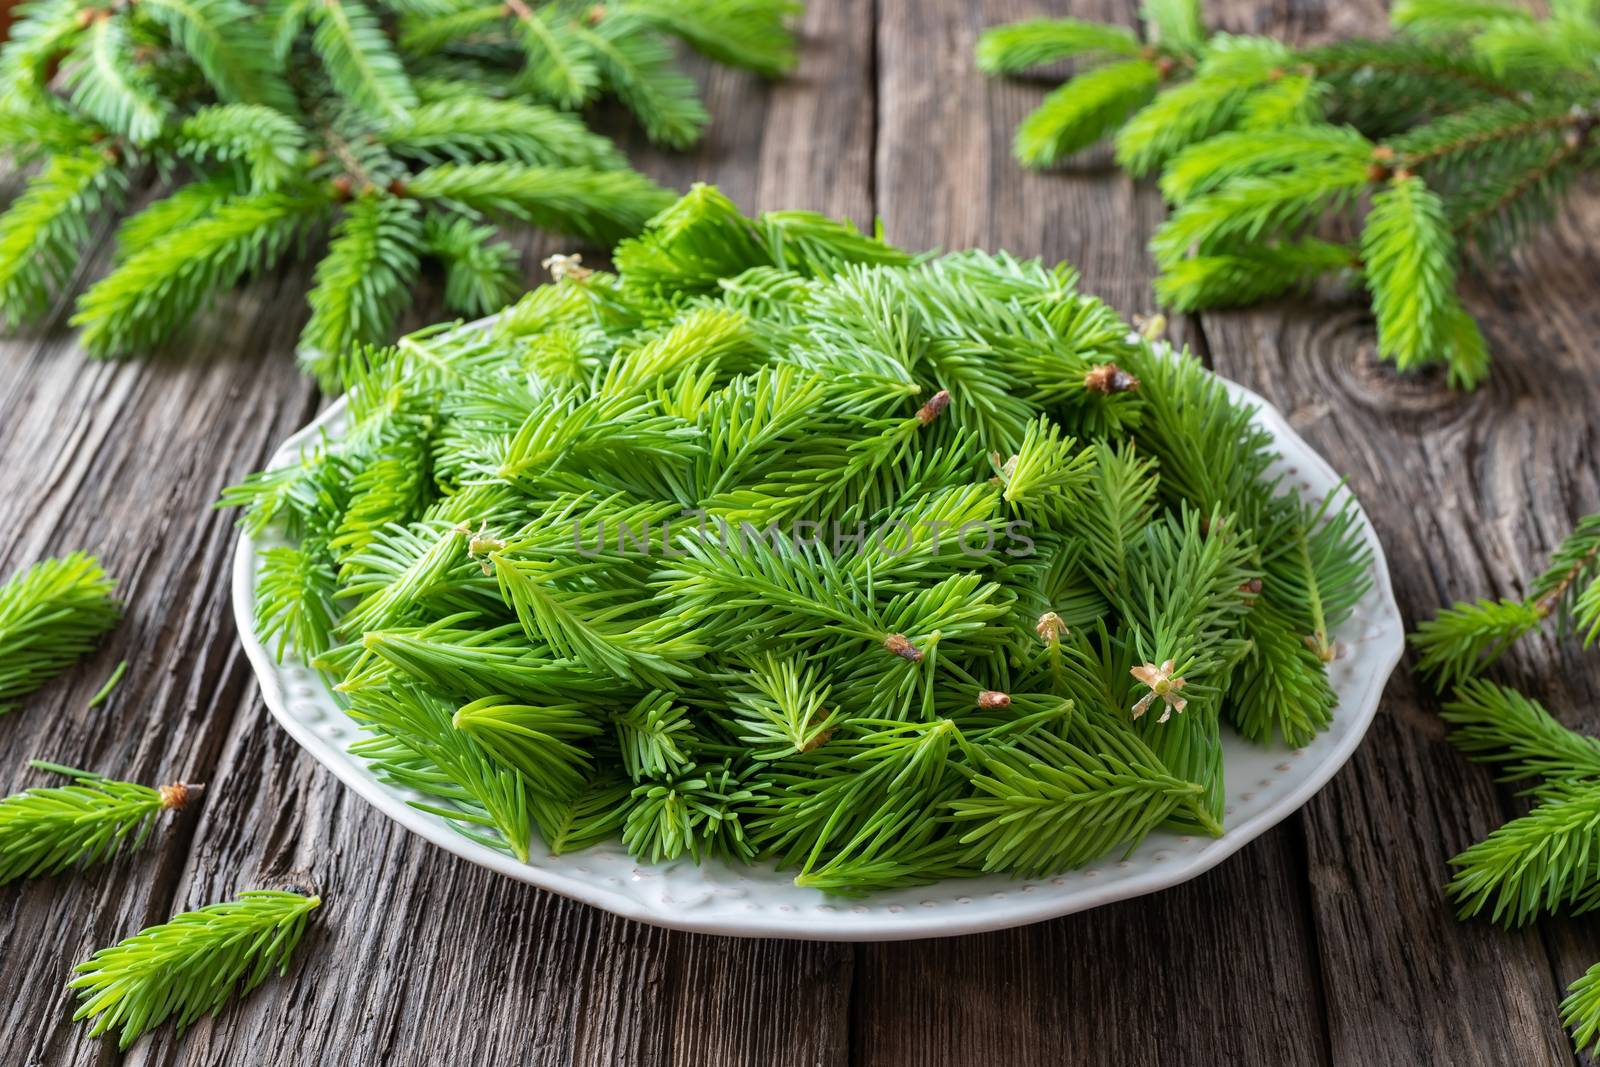 Spruce tips collected on a plate to prepare homemade herbal syrup